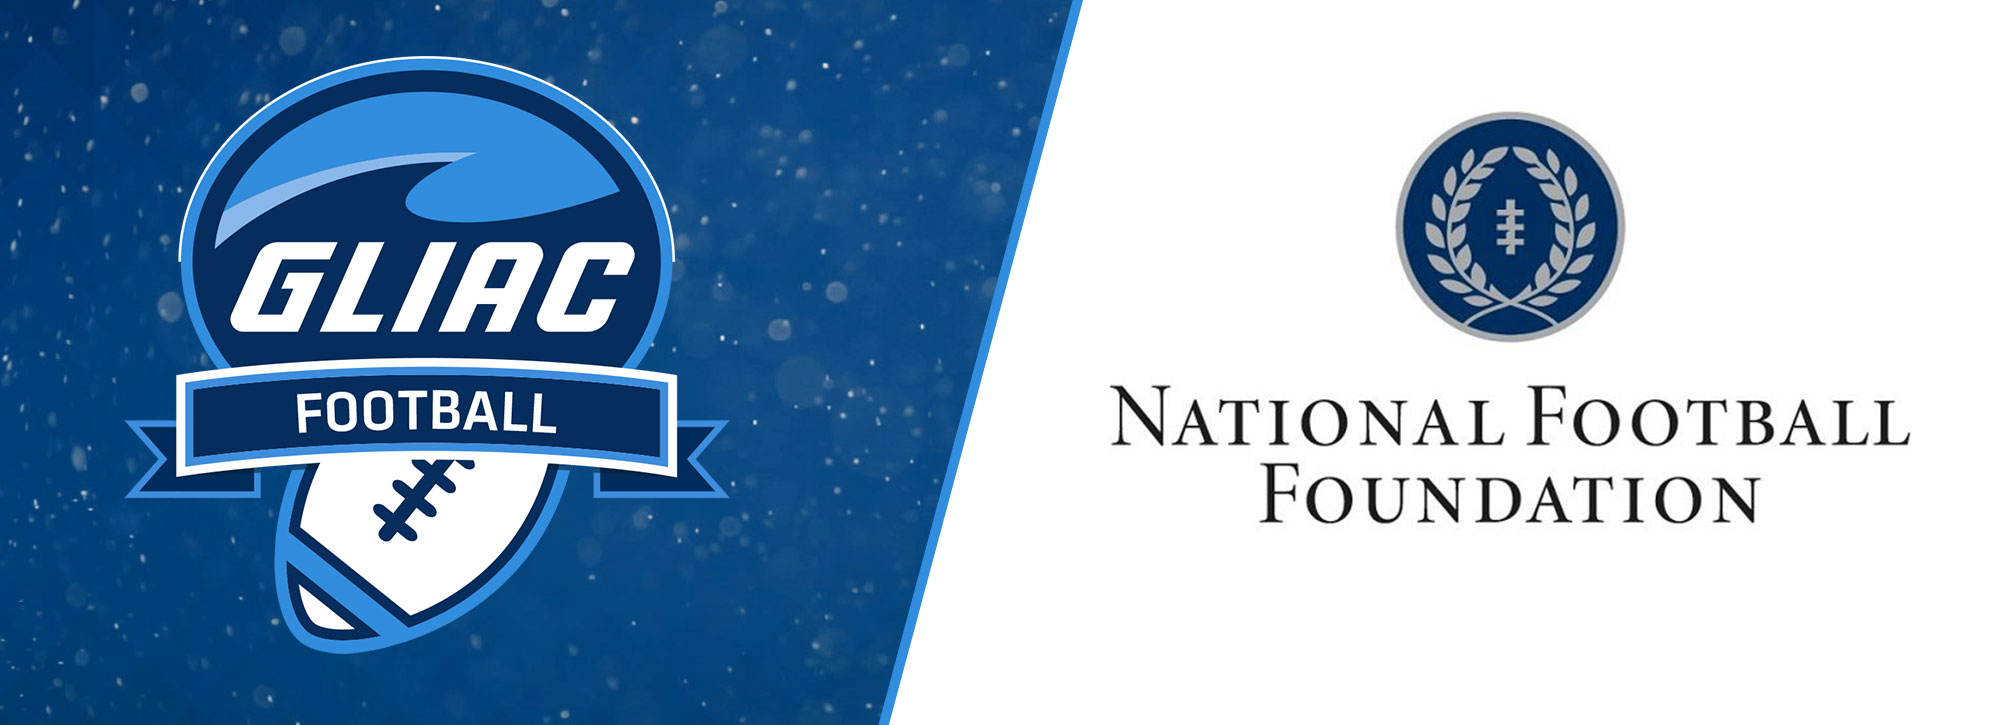 NFF Hampshire Honor Society Selects 33 #GLIACFB Scholars